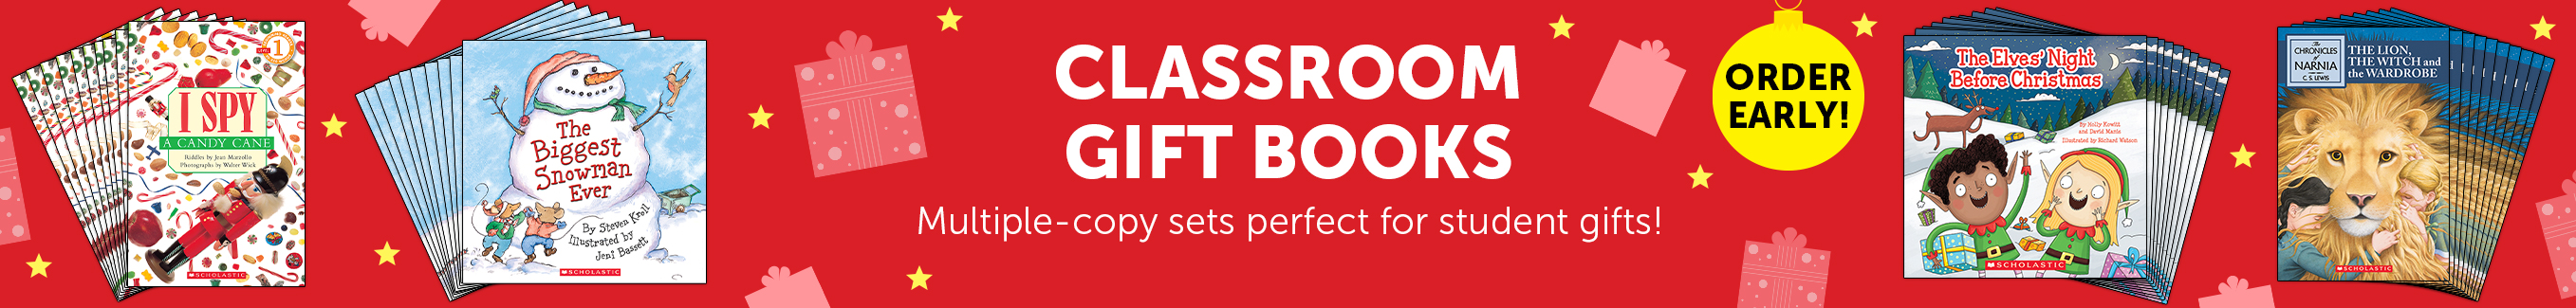 Classroom Gift Books. Multiple-copy sets perfect for student gifts! Shop Now